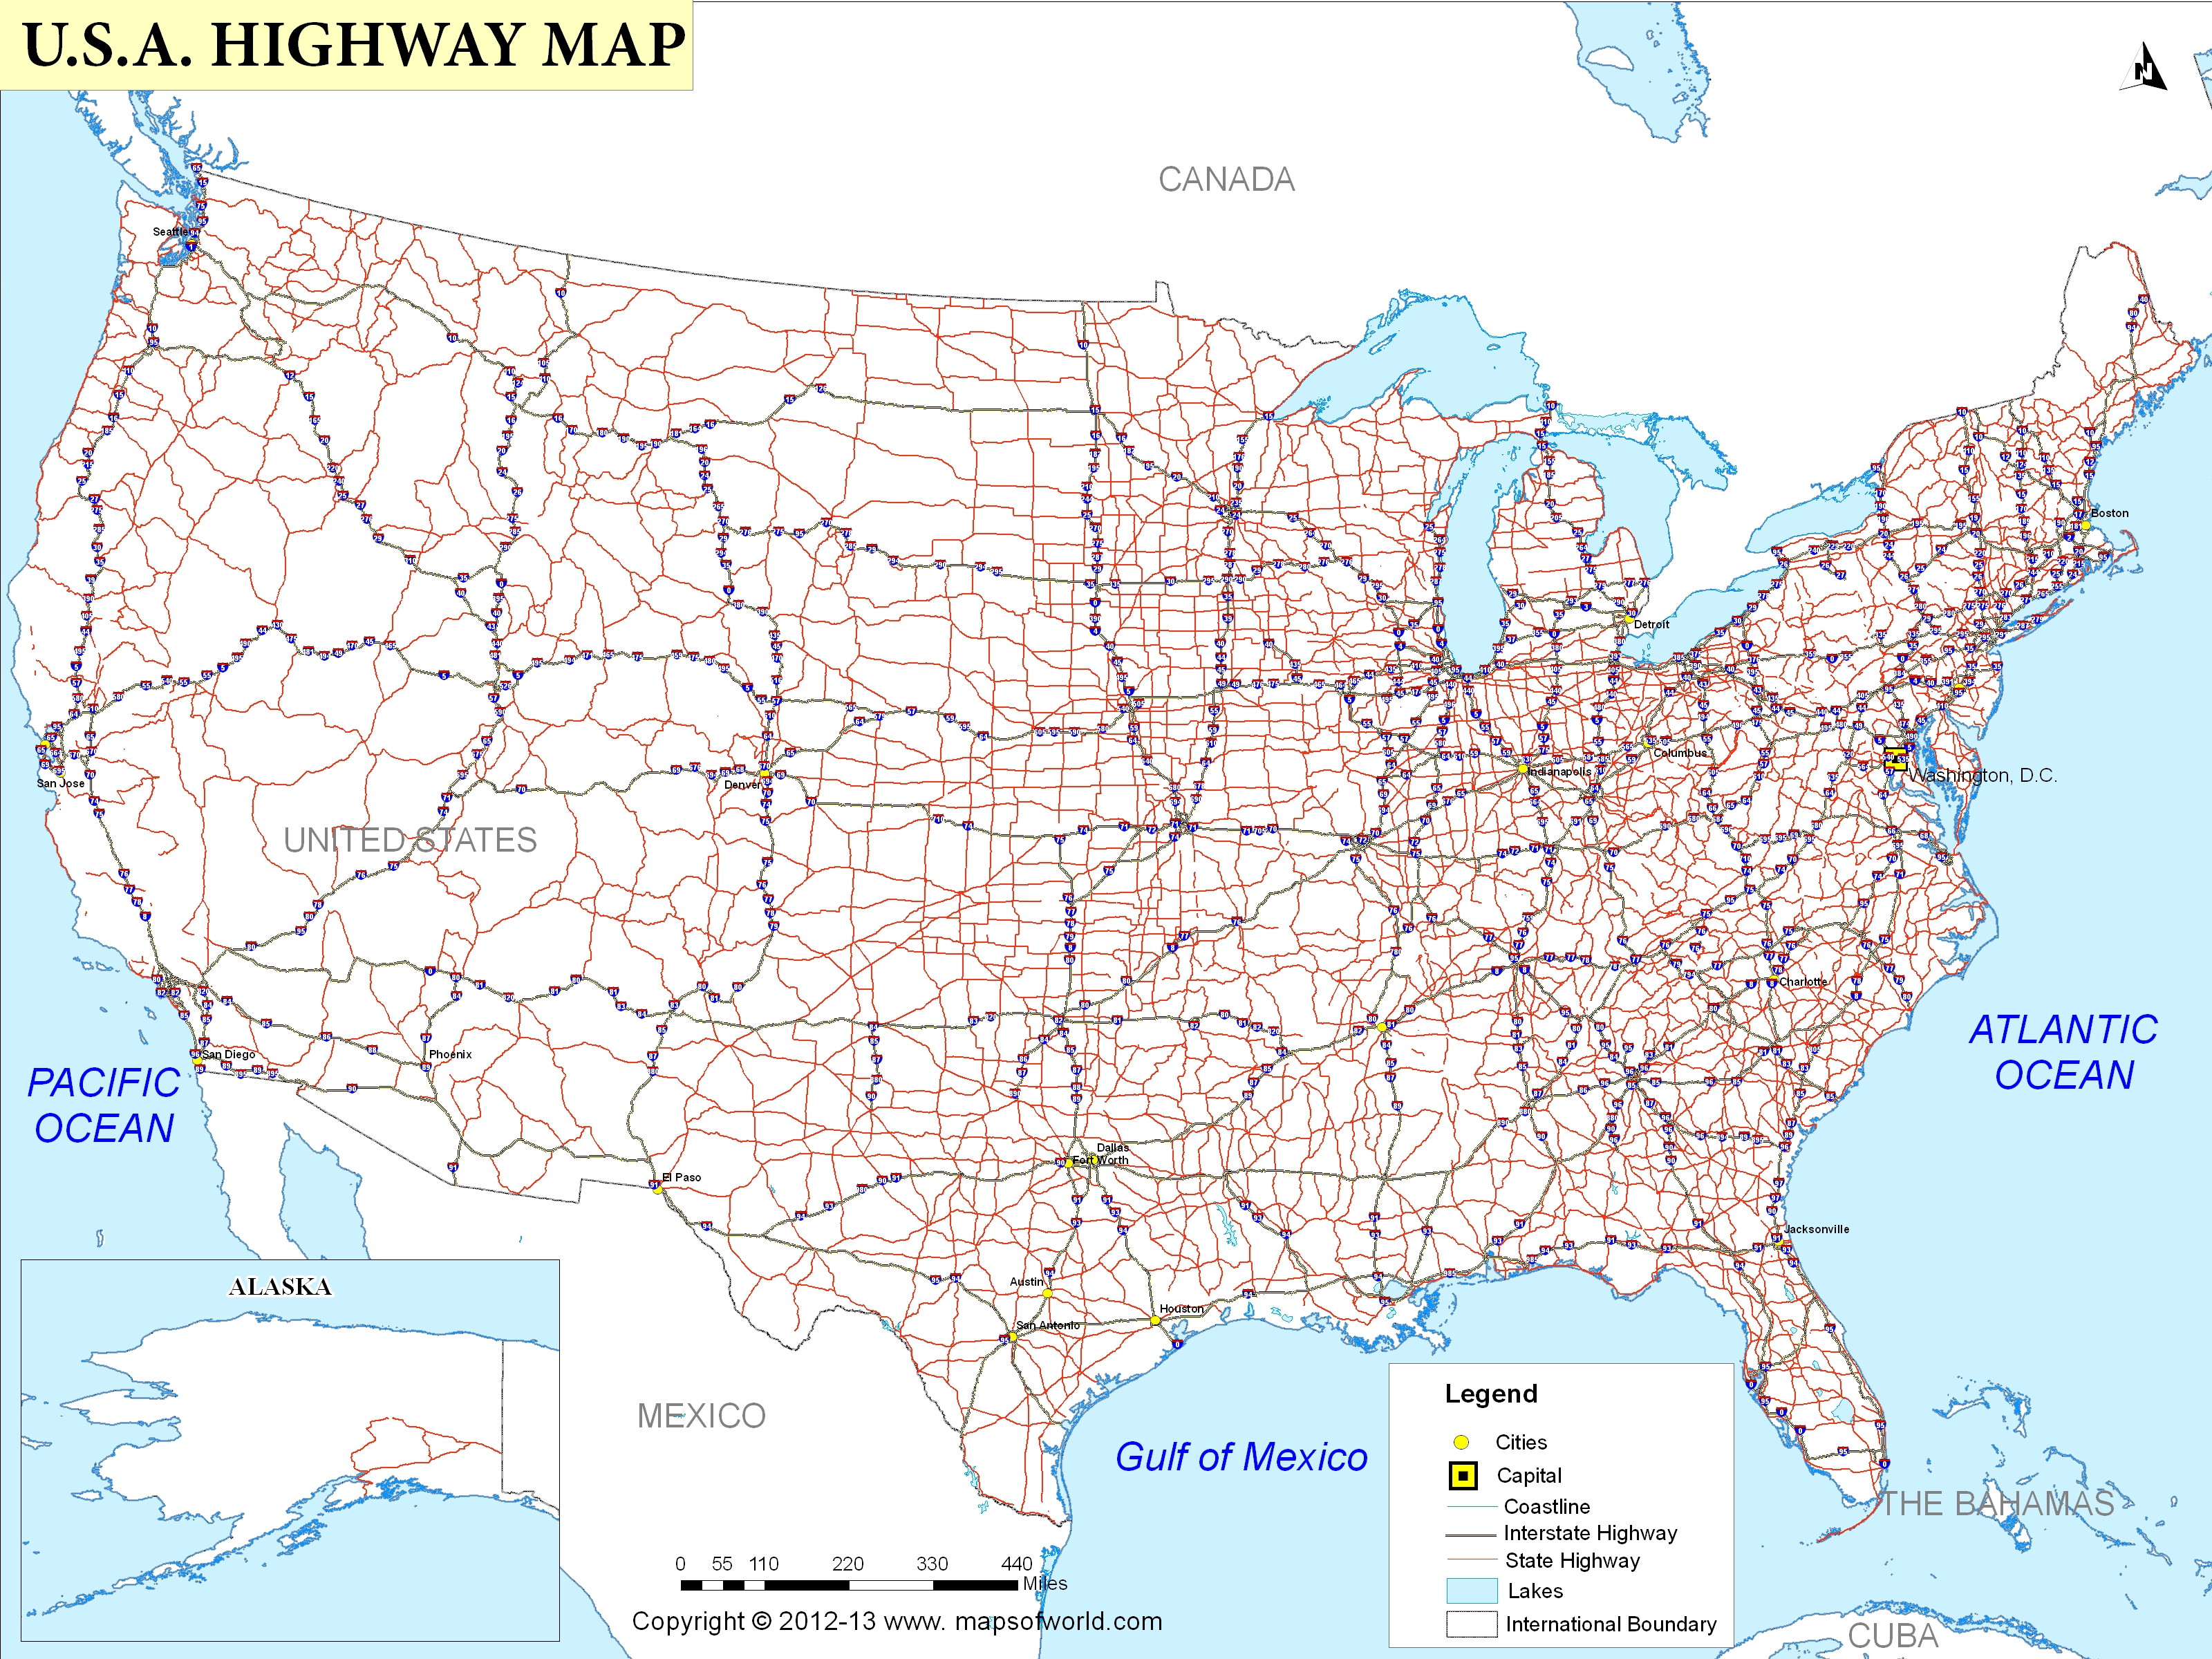 6 Best Images of United States Highway Map Printable - United States